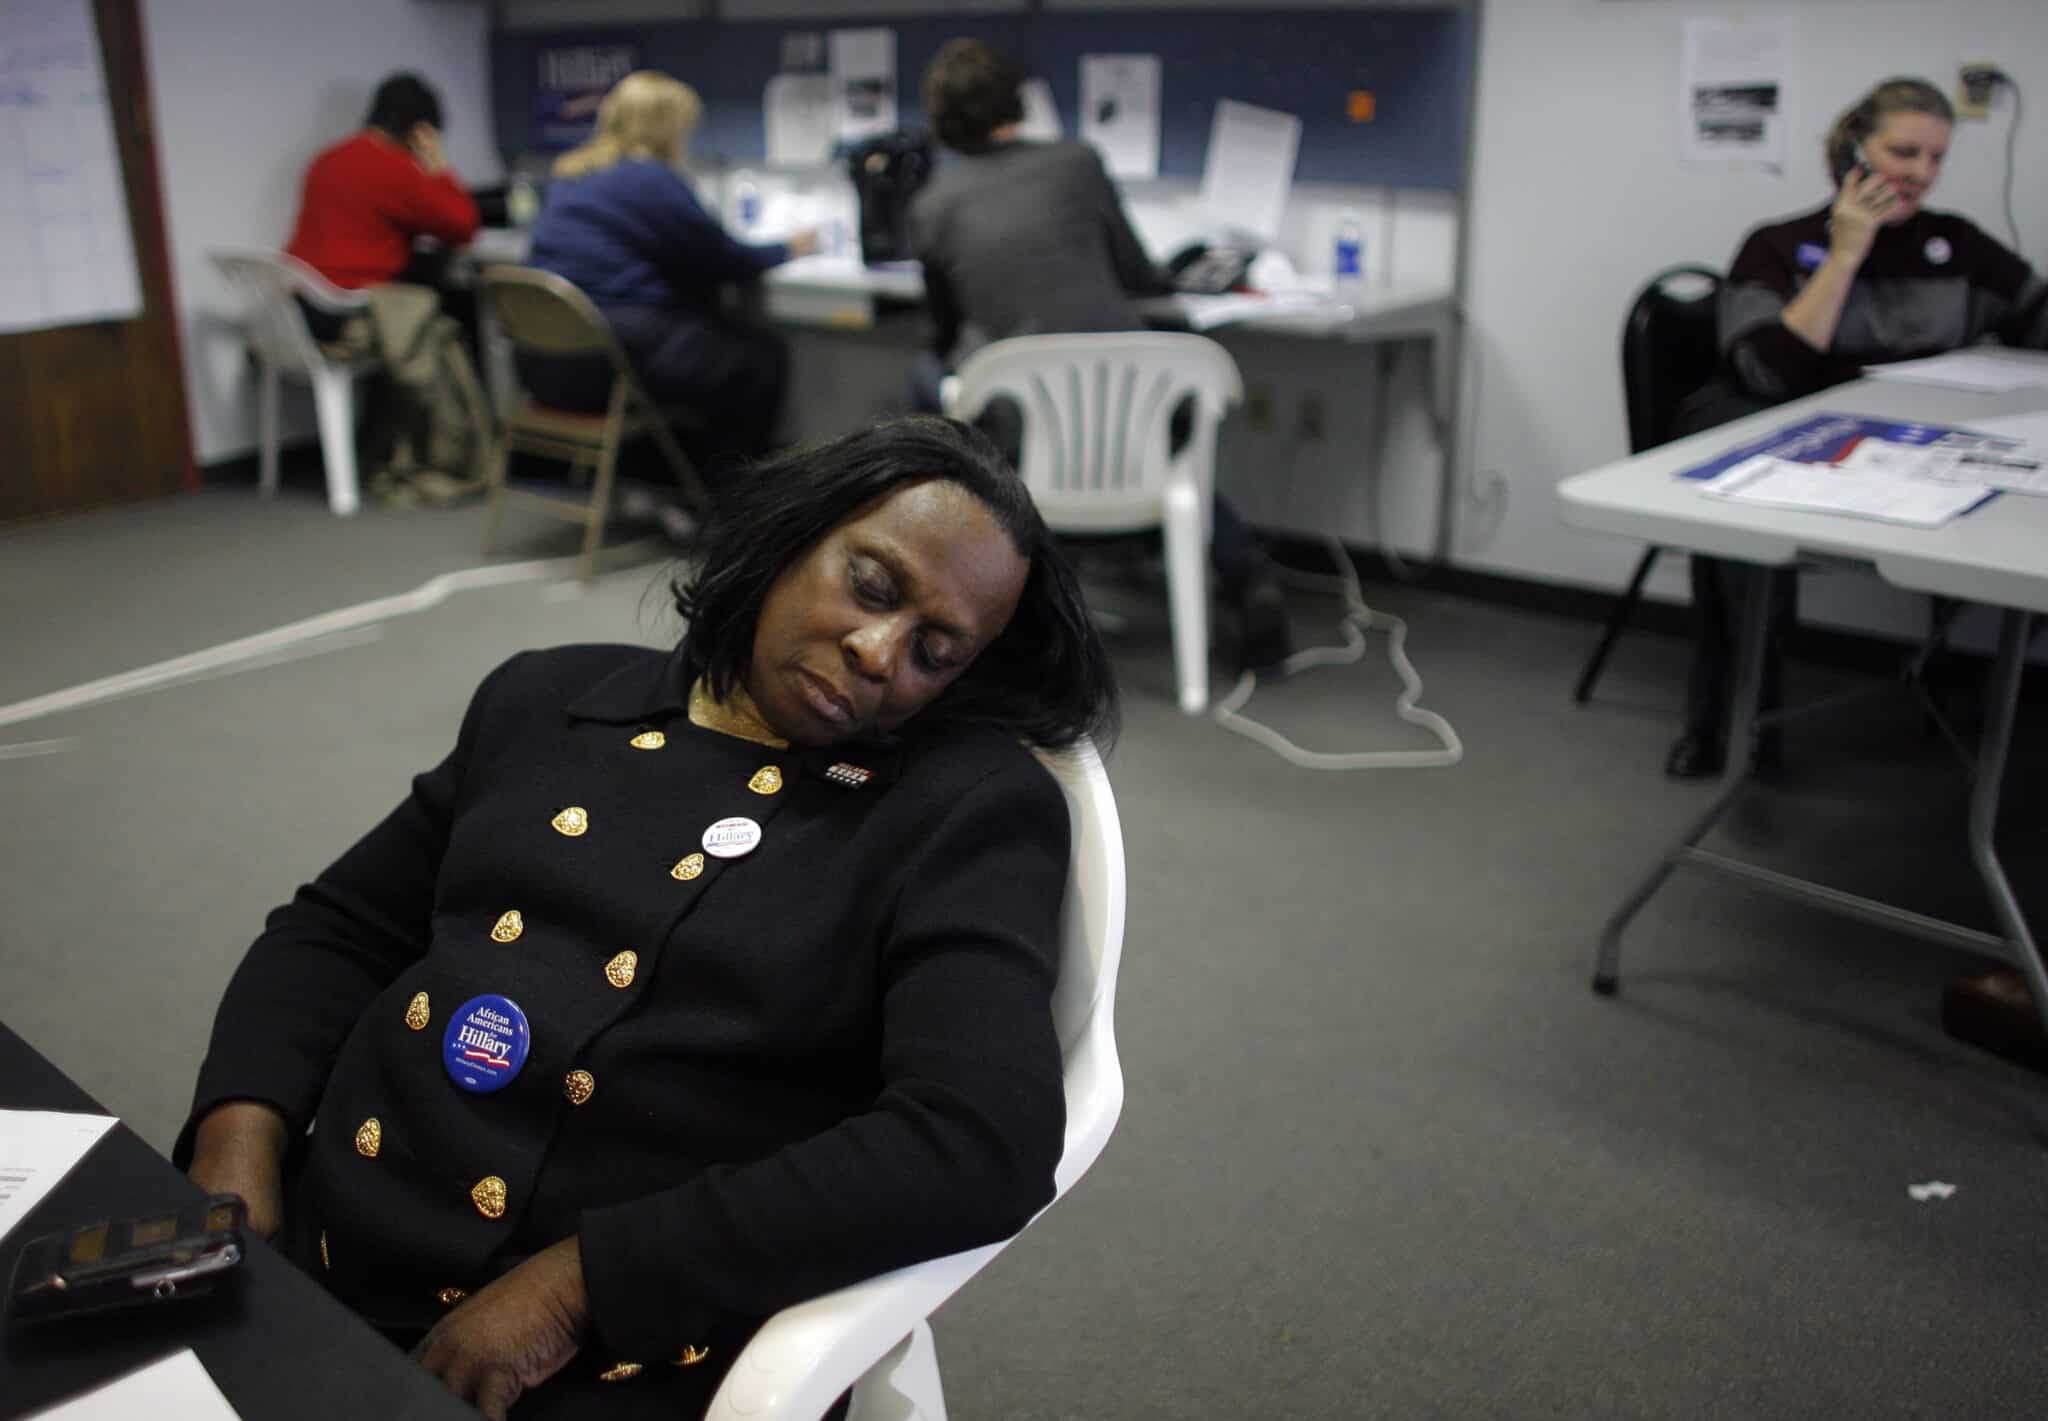 COLUMBUS, OH - MARCH 2:  A woman sleeps as volunteers make phone calls at the campaign headquarters of Sen. Hillary Clinton (D-NY) March 2, 2008 in Columbus, Ohio. A tight Democratic race between presidential hopefuls Sen. Hillary Clinton (D-NY) and Sen. Barack Obama (D-IL) have volunteers working to communicate and pass on their candidates' message to voters in Ohio.   (Photo by Eric Thayer/Getty Images)